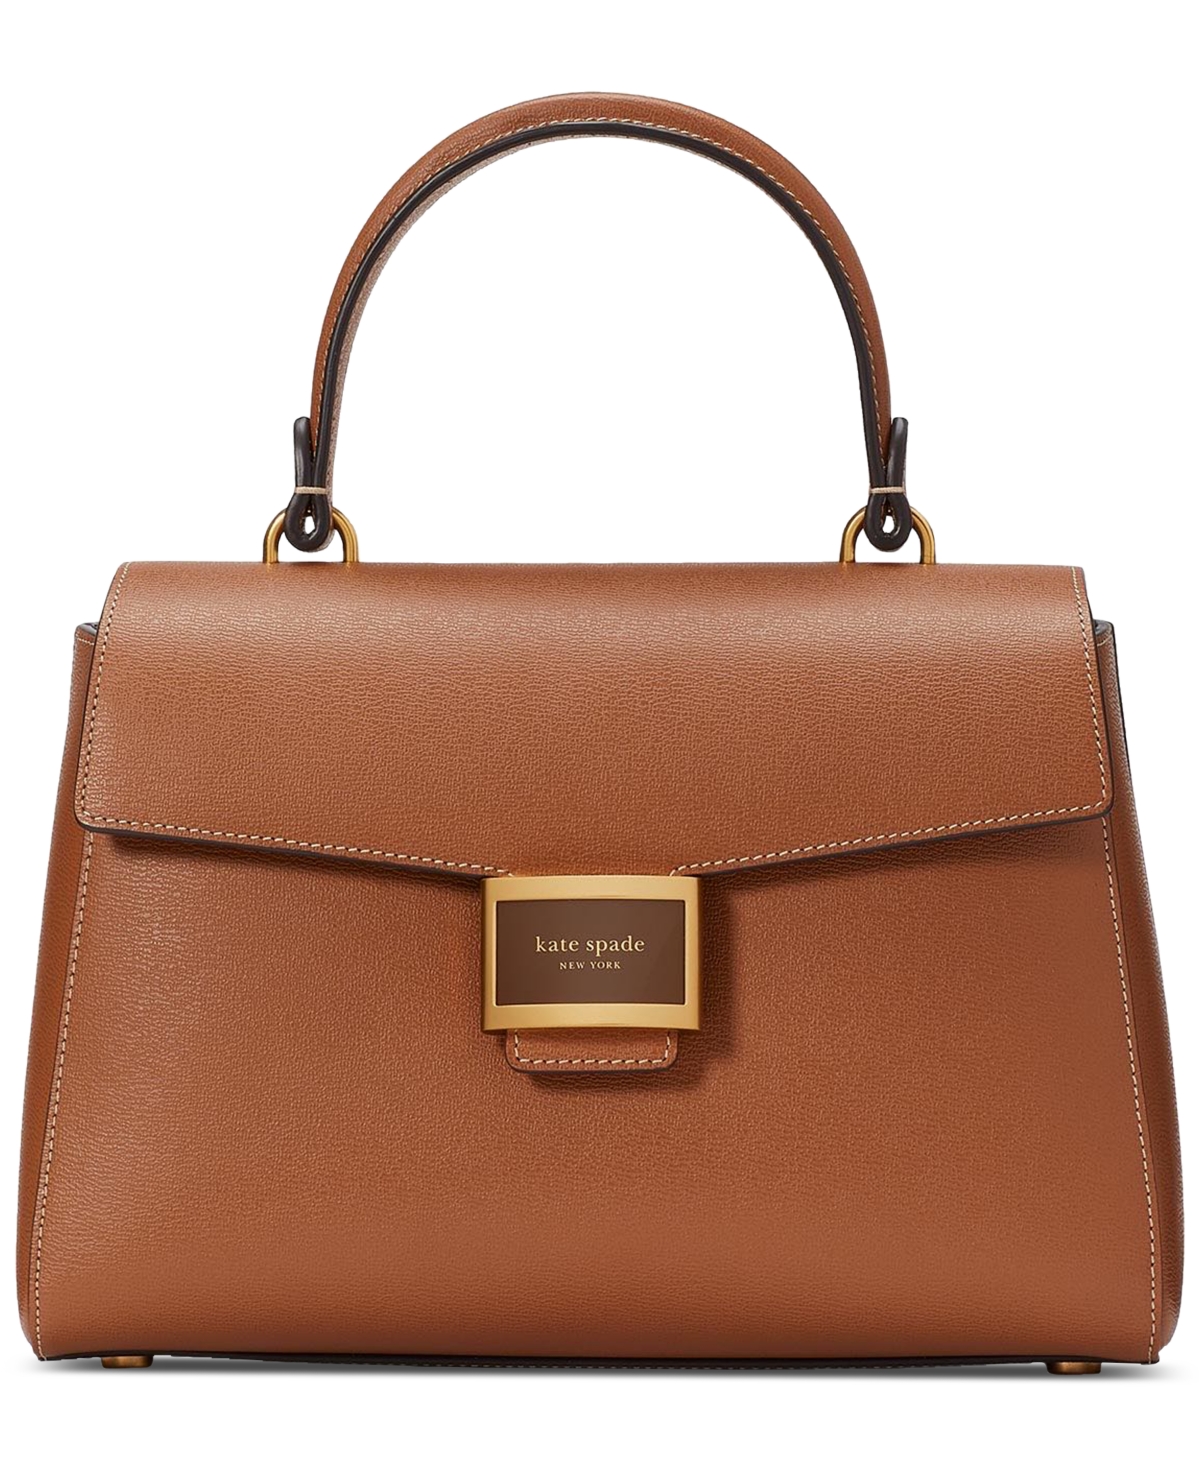 Kate Spade New York Katy Textured Leather Small Top Handle Handbag In Allspice Cake